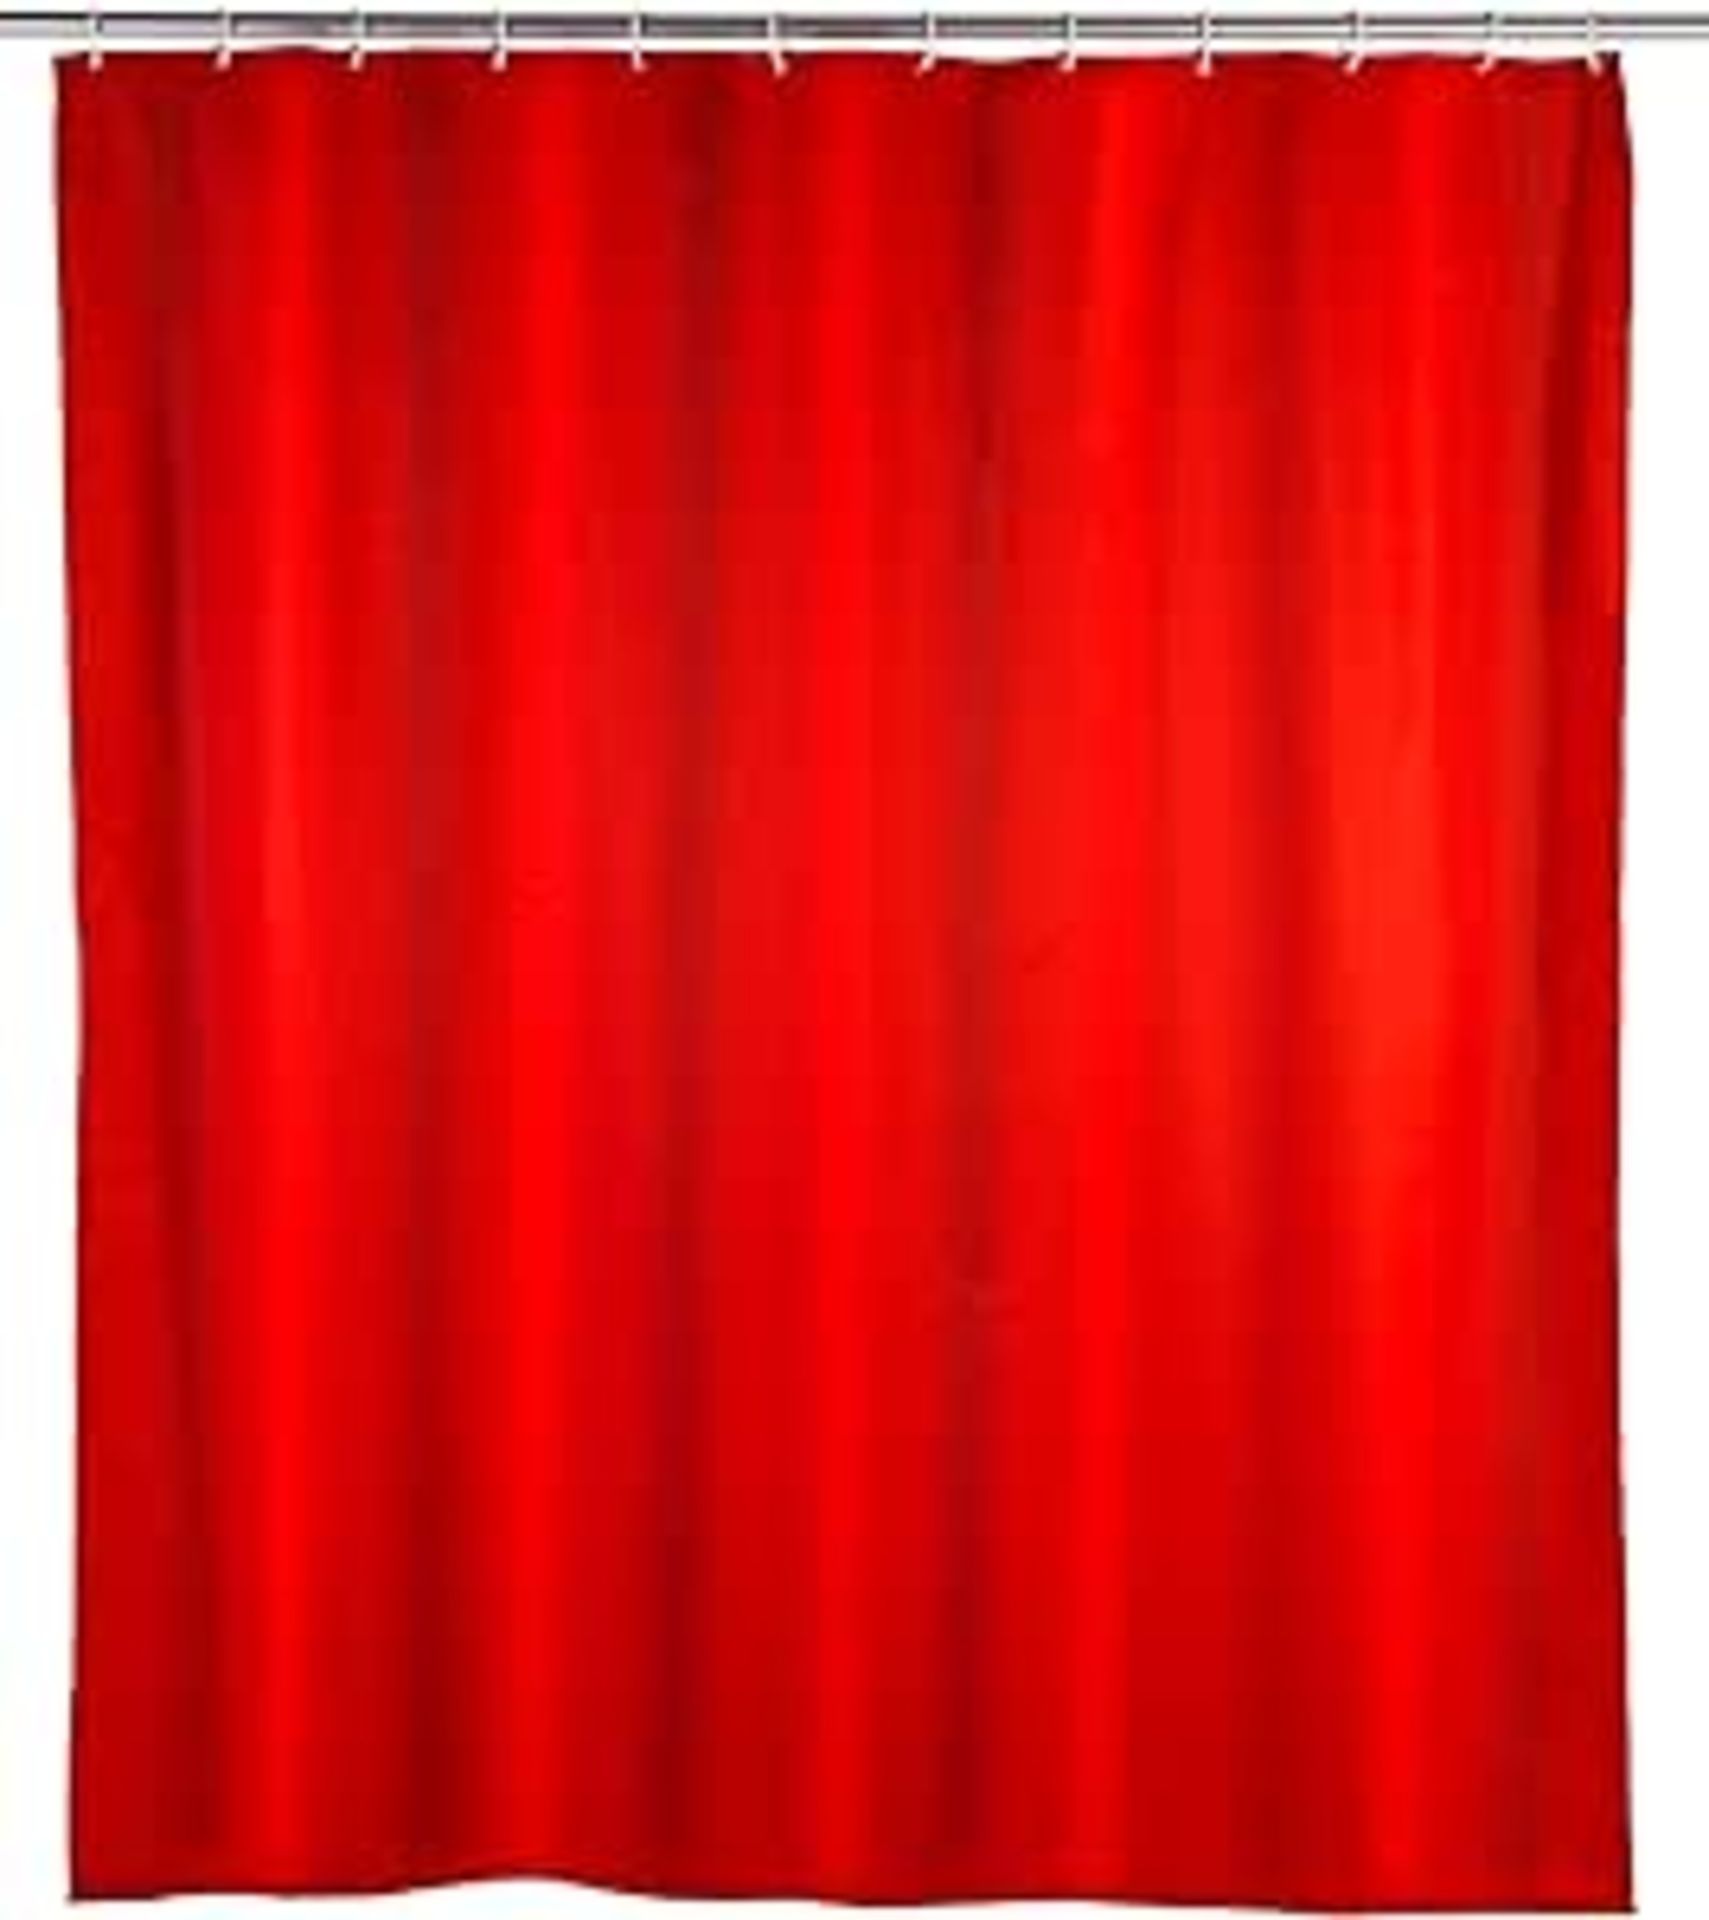 3x Red Shower Curtain Sets (Delivery Band A)